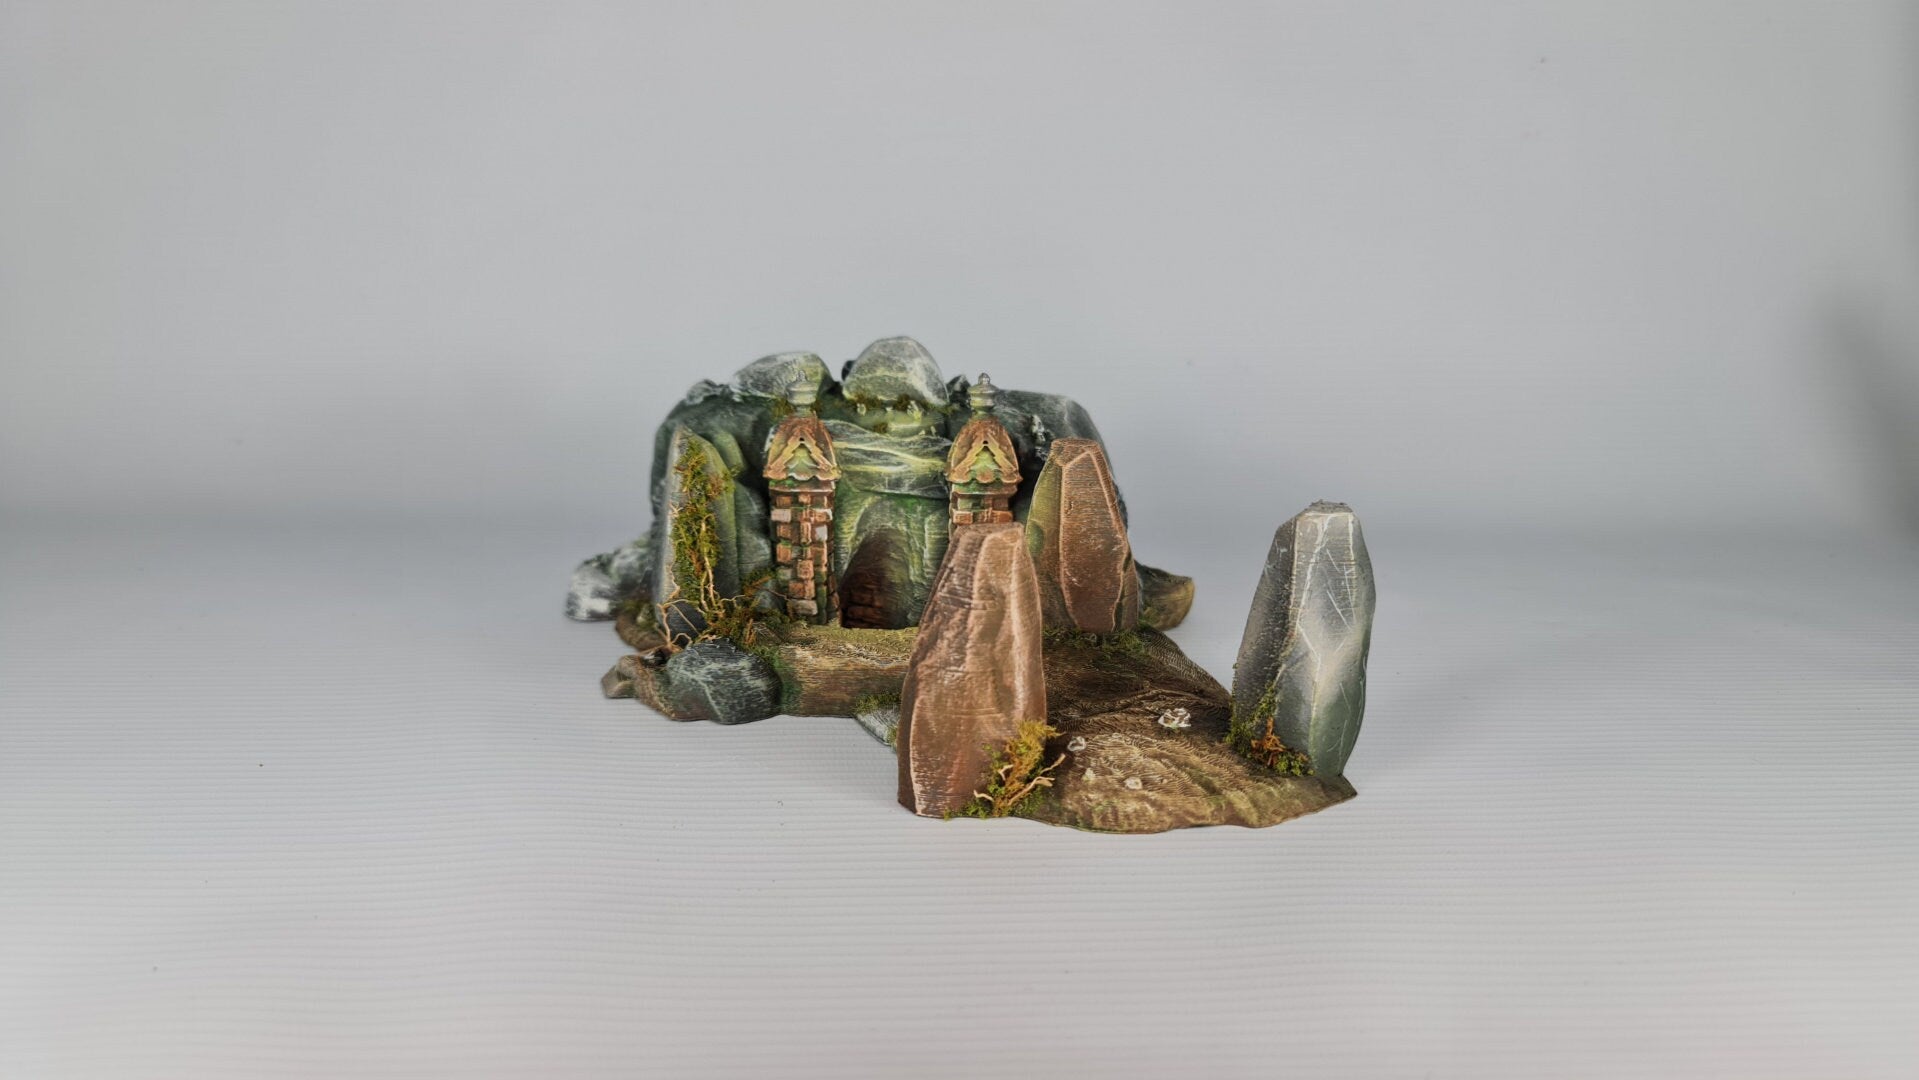 Barrow - 3DP4U Medieval Town | Miniature | Wargaming | Roleplaying Games | 32mm | Playable | Filament | 3d printed